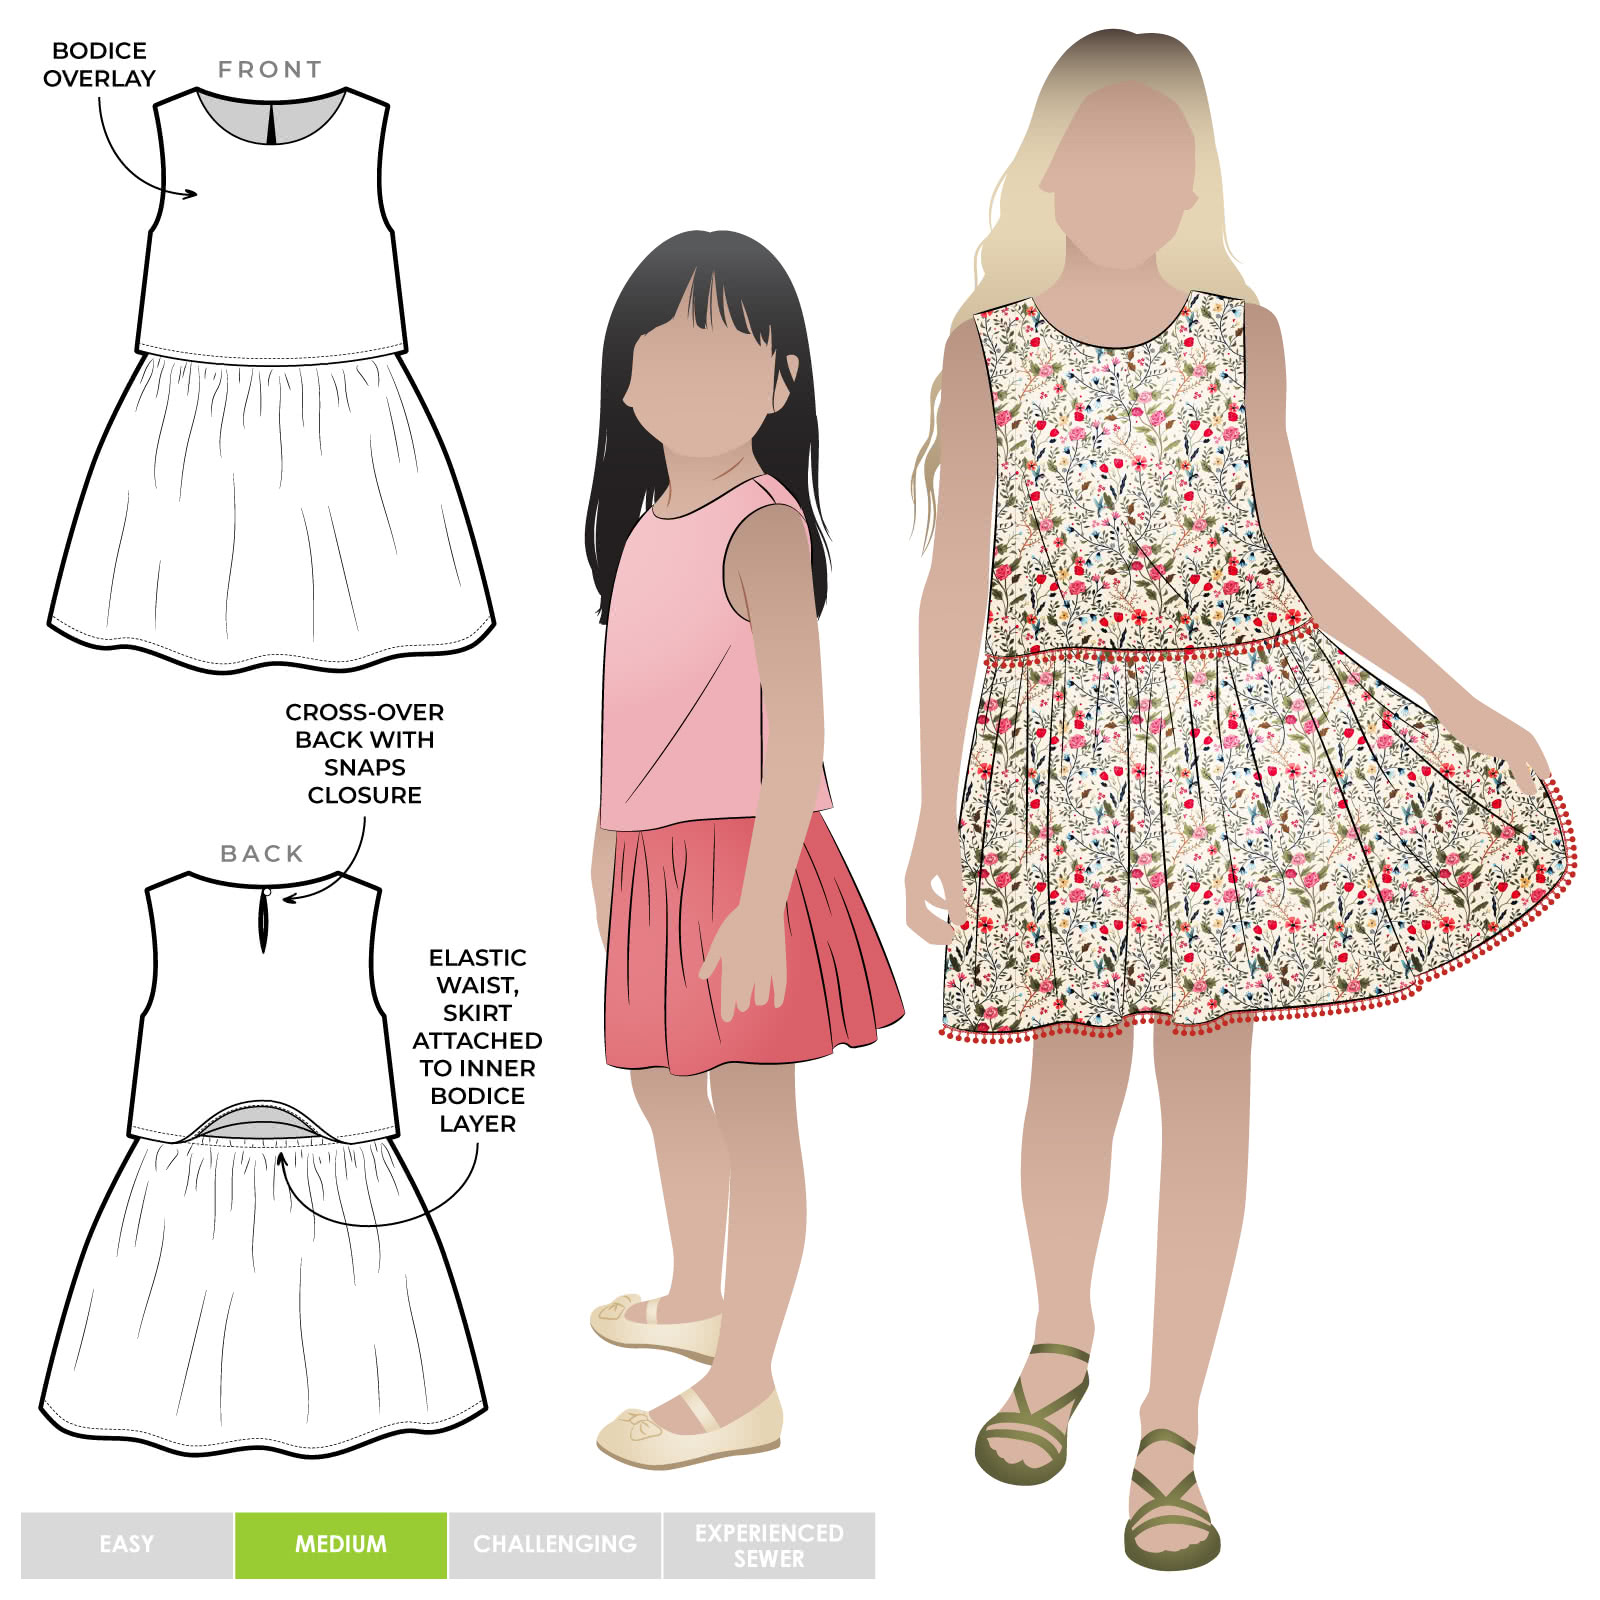 Victoria Kids Woven Dress By Style Arc - Easy-fit dress featuring a bodice overlay, elastic waist, and a gathered skirt, elegantly finished with a back neck button, for Kids 02-14